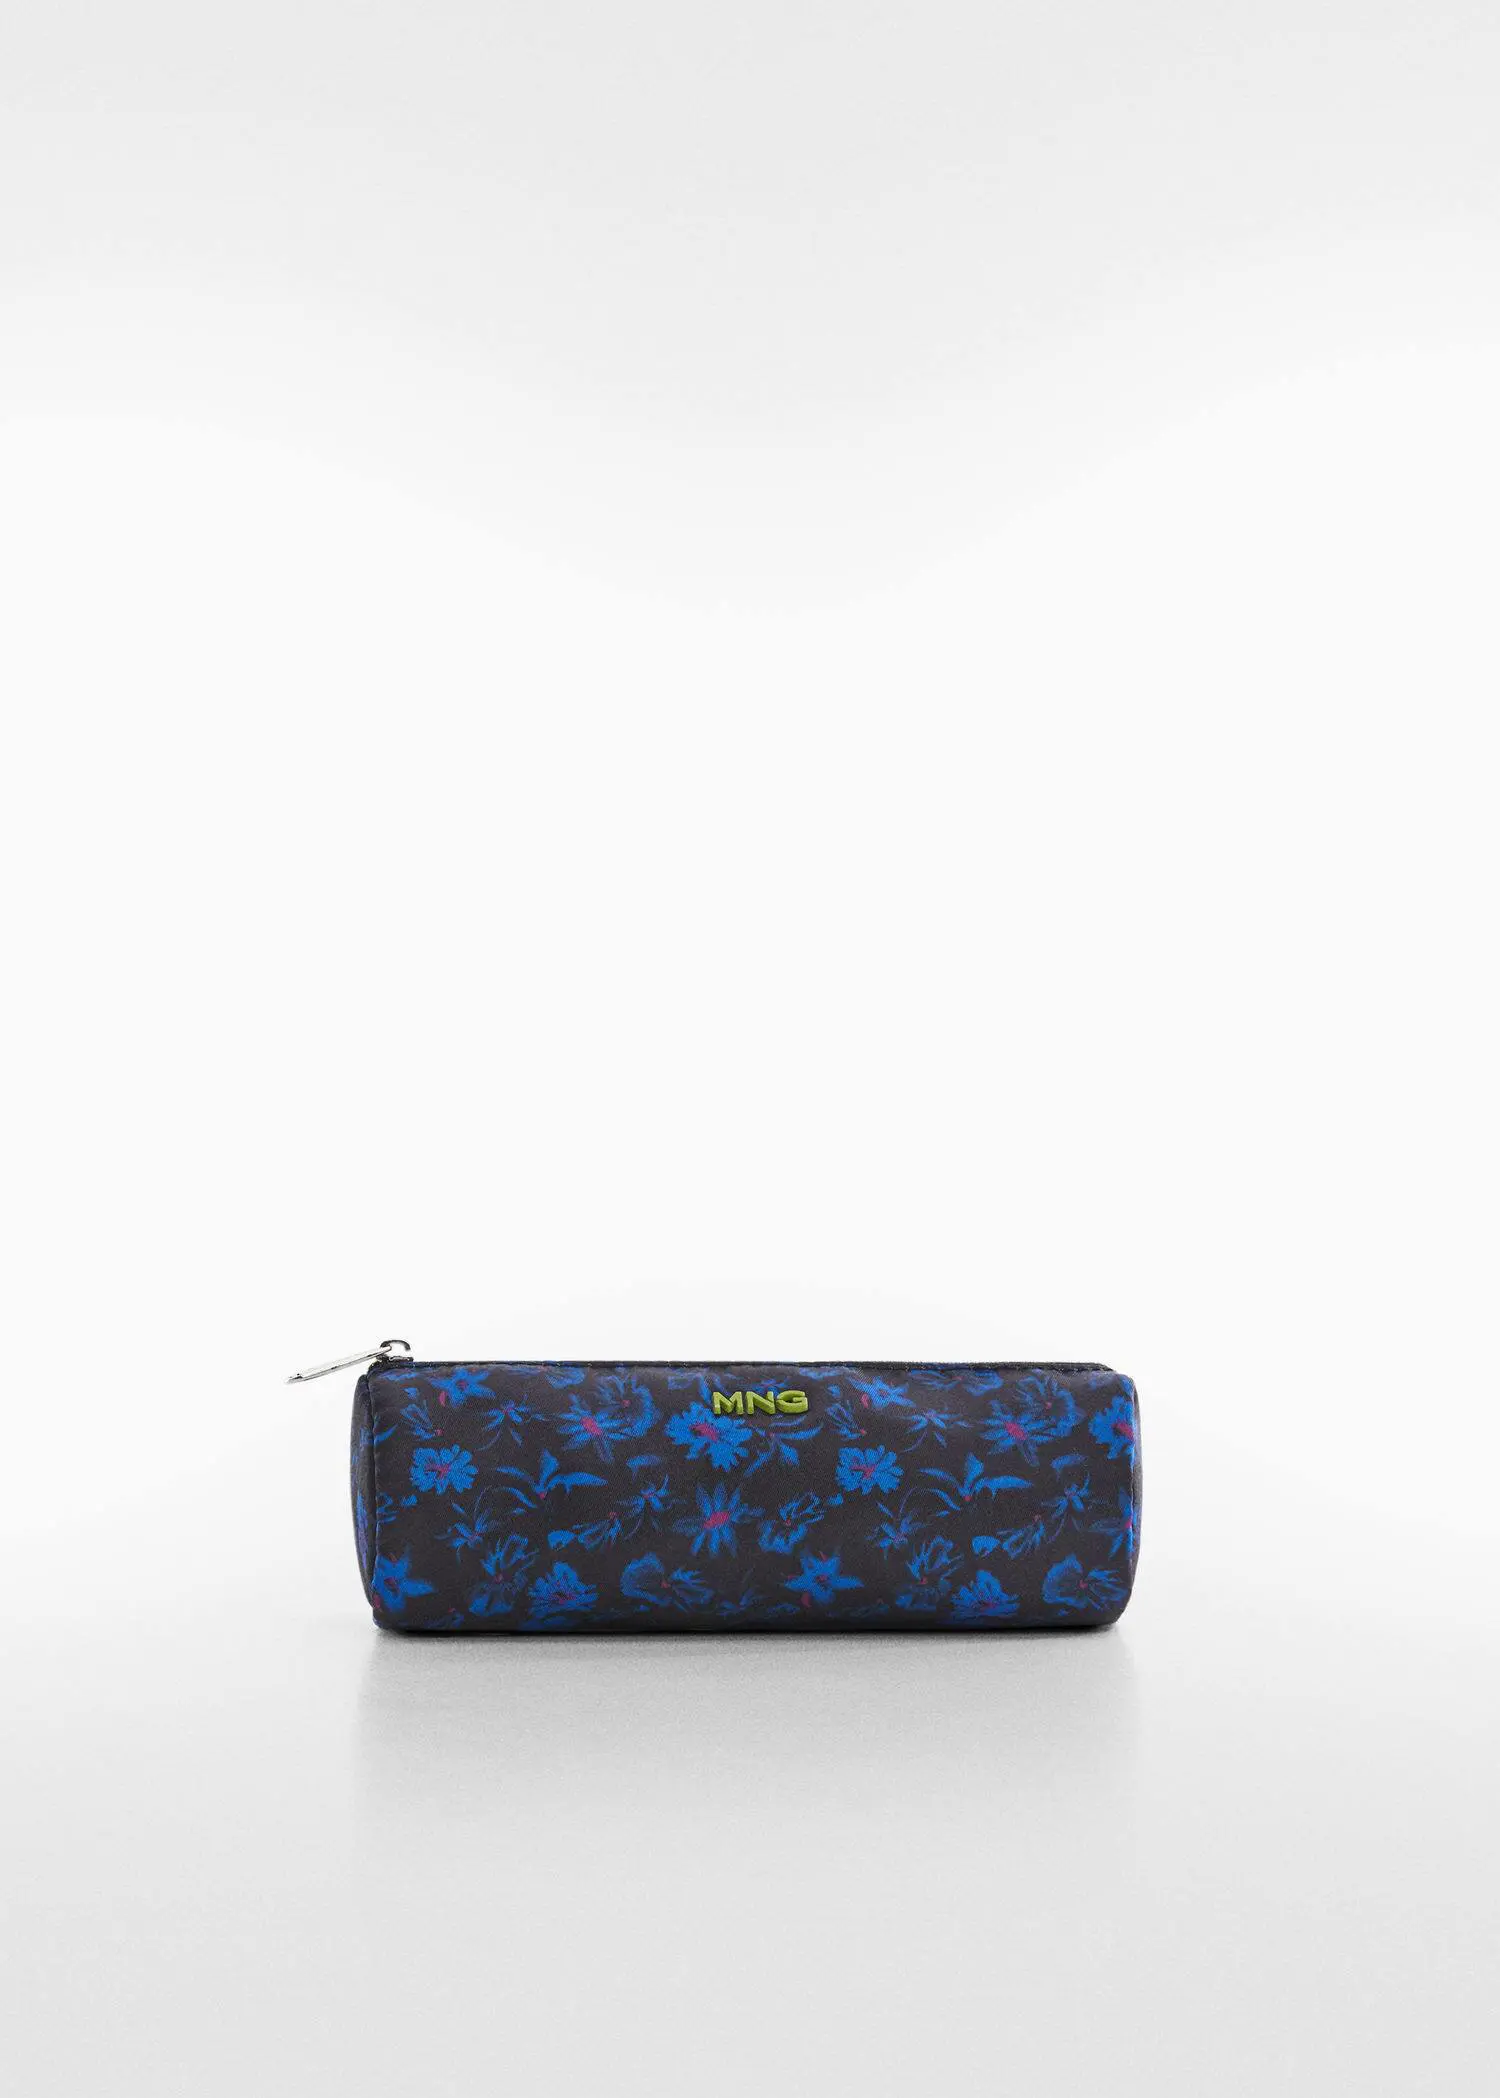 Mango Logo zipped pencil case. a blue pencil case sitting on top of a white table. 